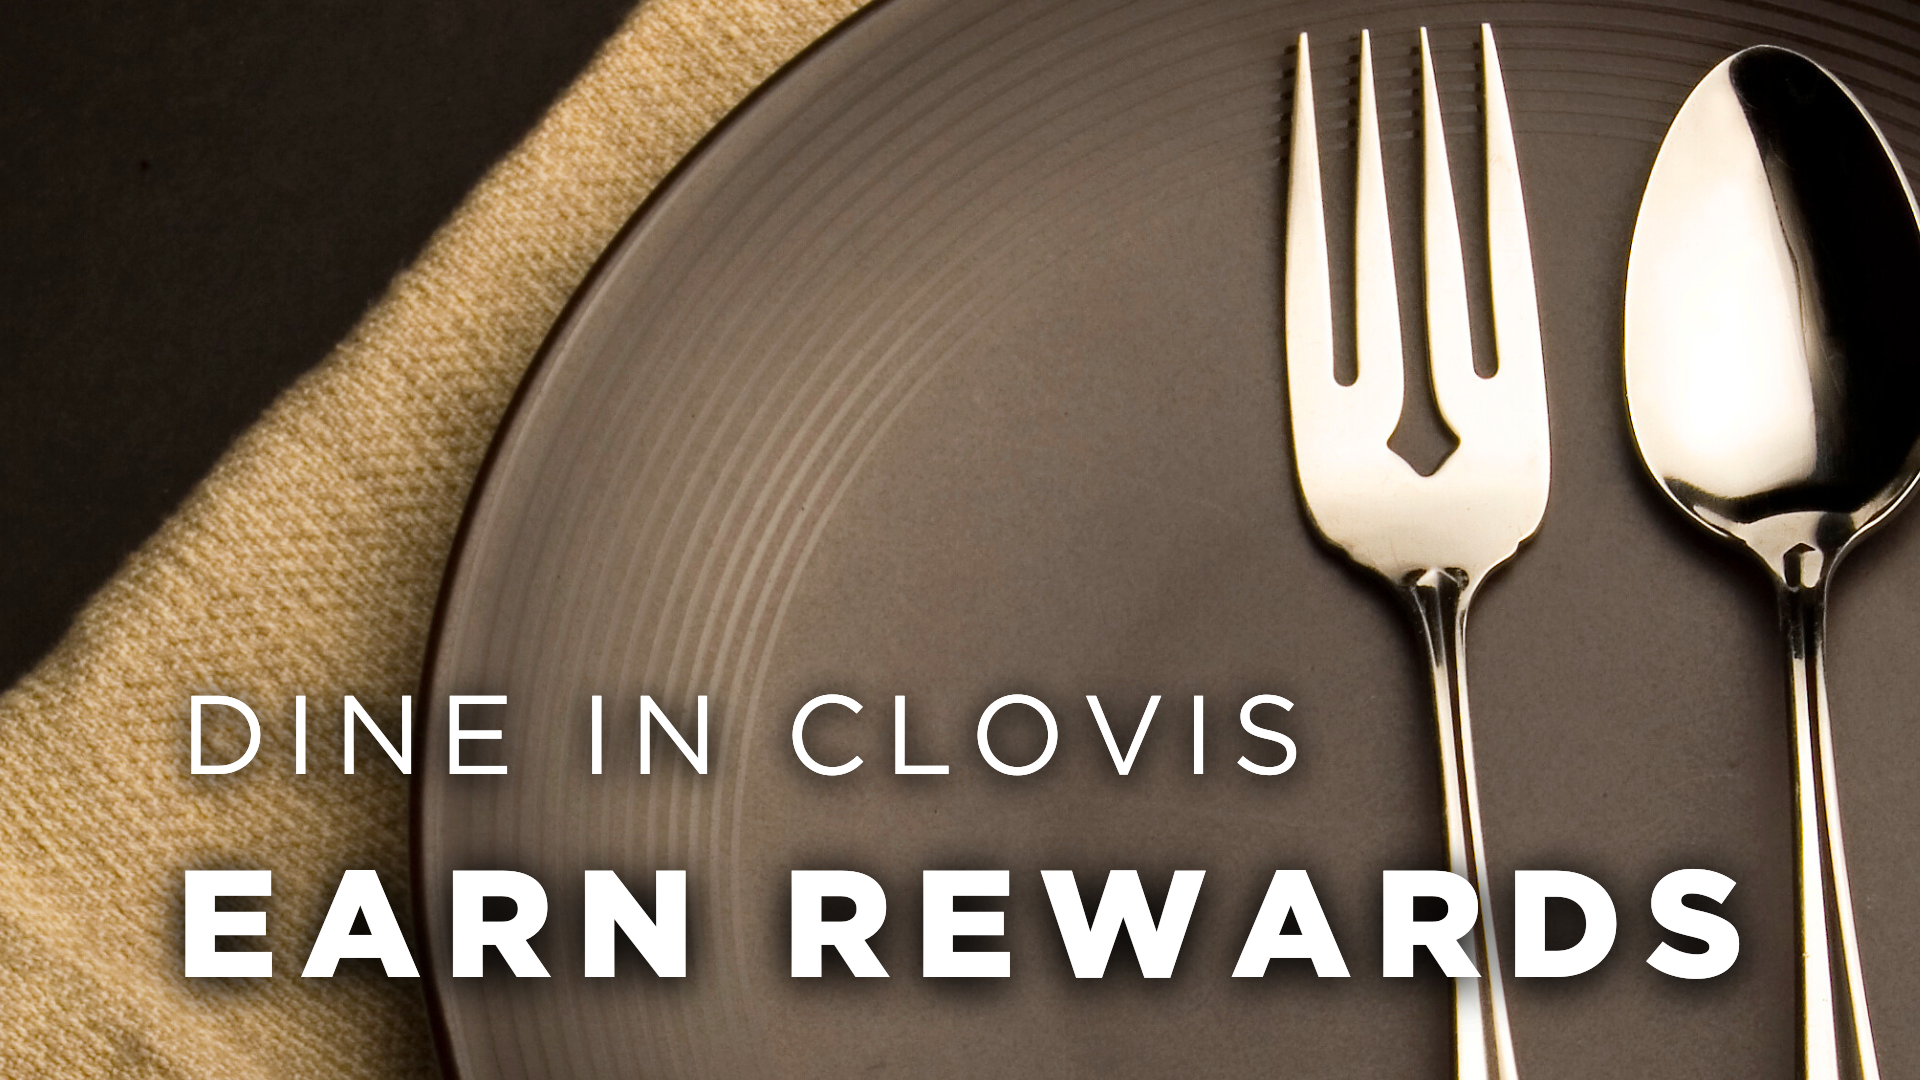 You are currently viewing Support Clovis Restaurants, Earn Rewards!